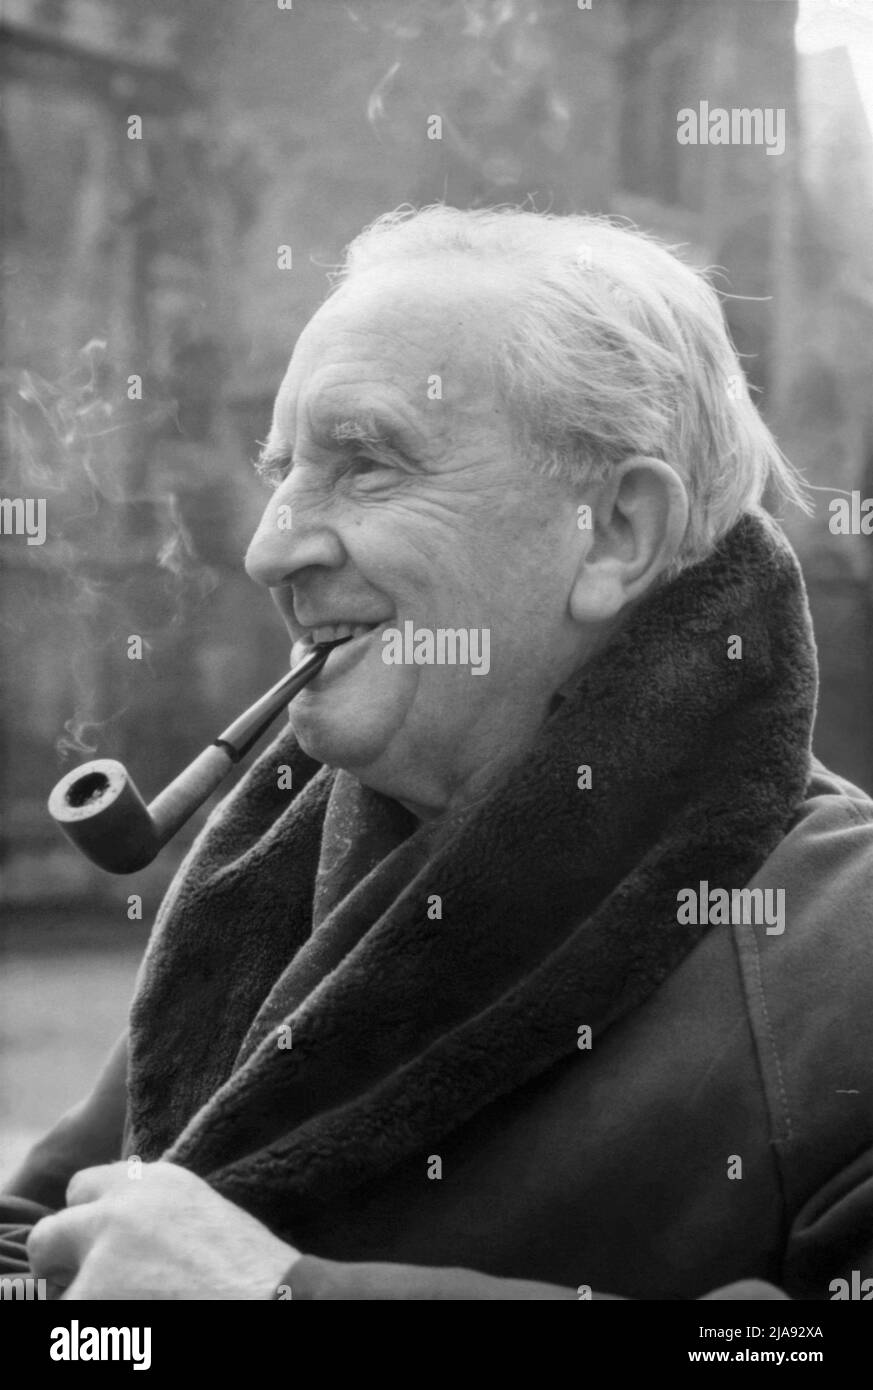 J.R.R. Tolkien (1892-1973), Oxford professor, philologist, and British author of classic works of fiction such as The Hobbit, Lord of the Rings, and The Silmarillion. (Photo: February 1968) Stock Photo